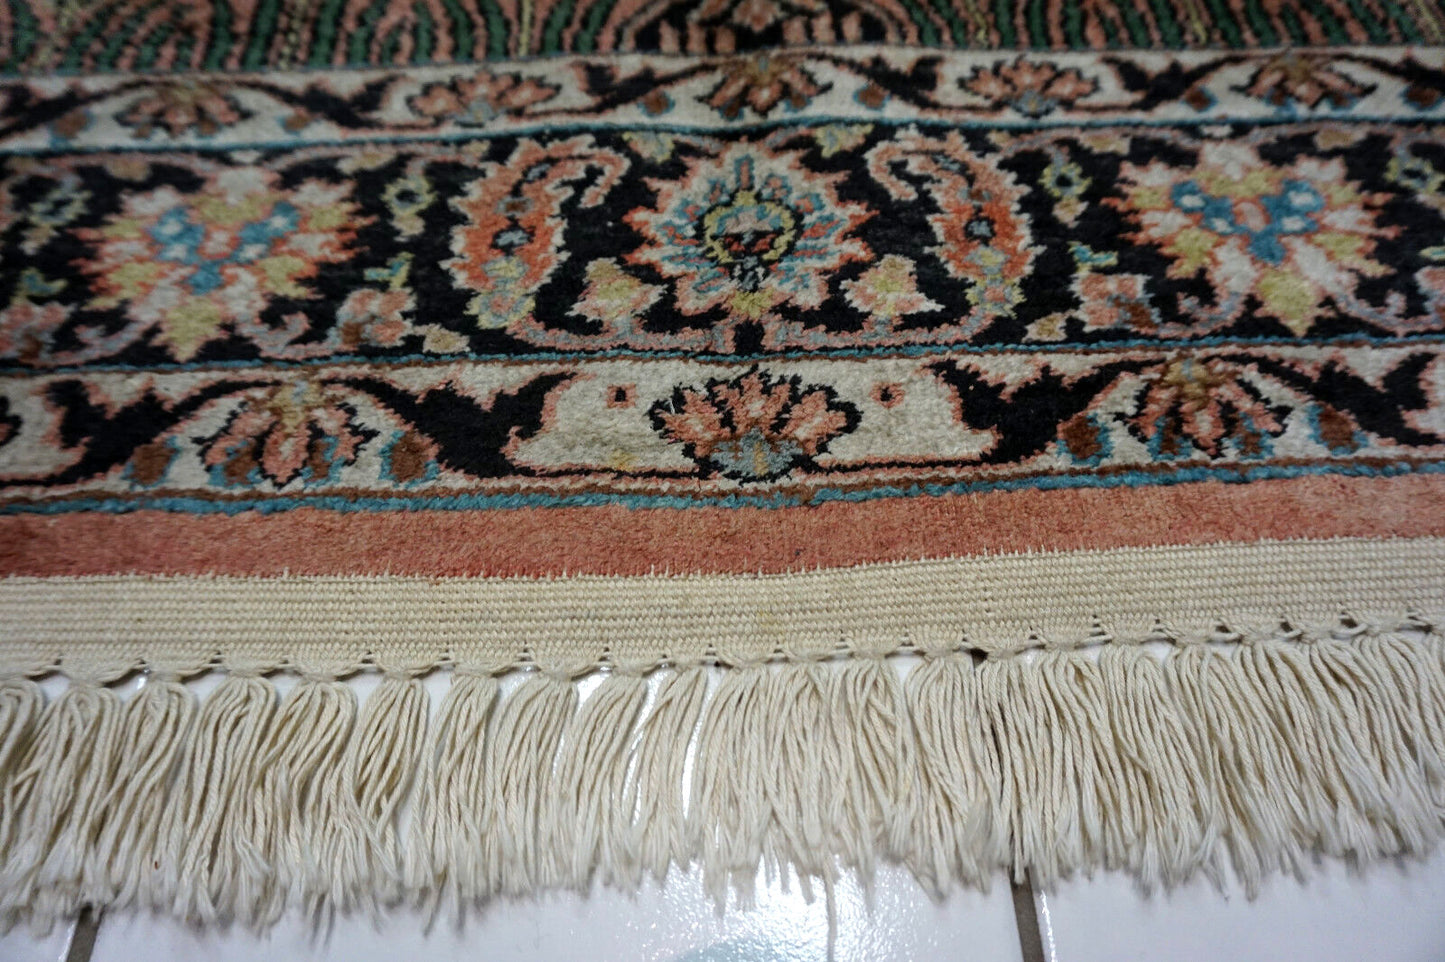 Exquisite Silk Rug from India's Kashmir Region in Good Condition